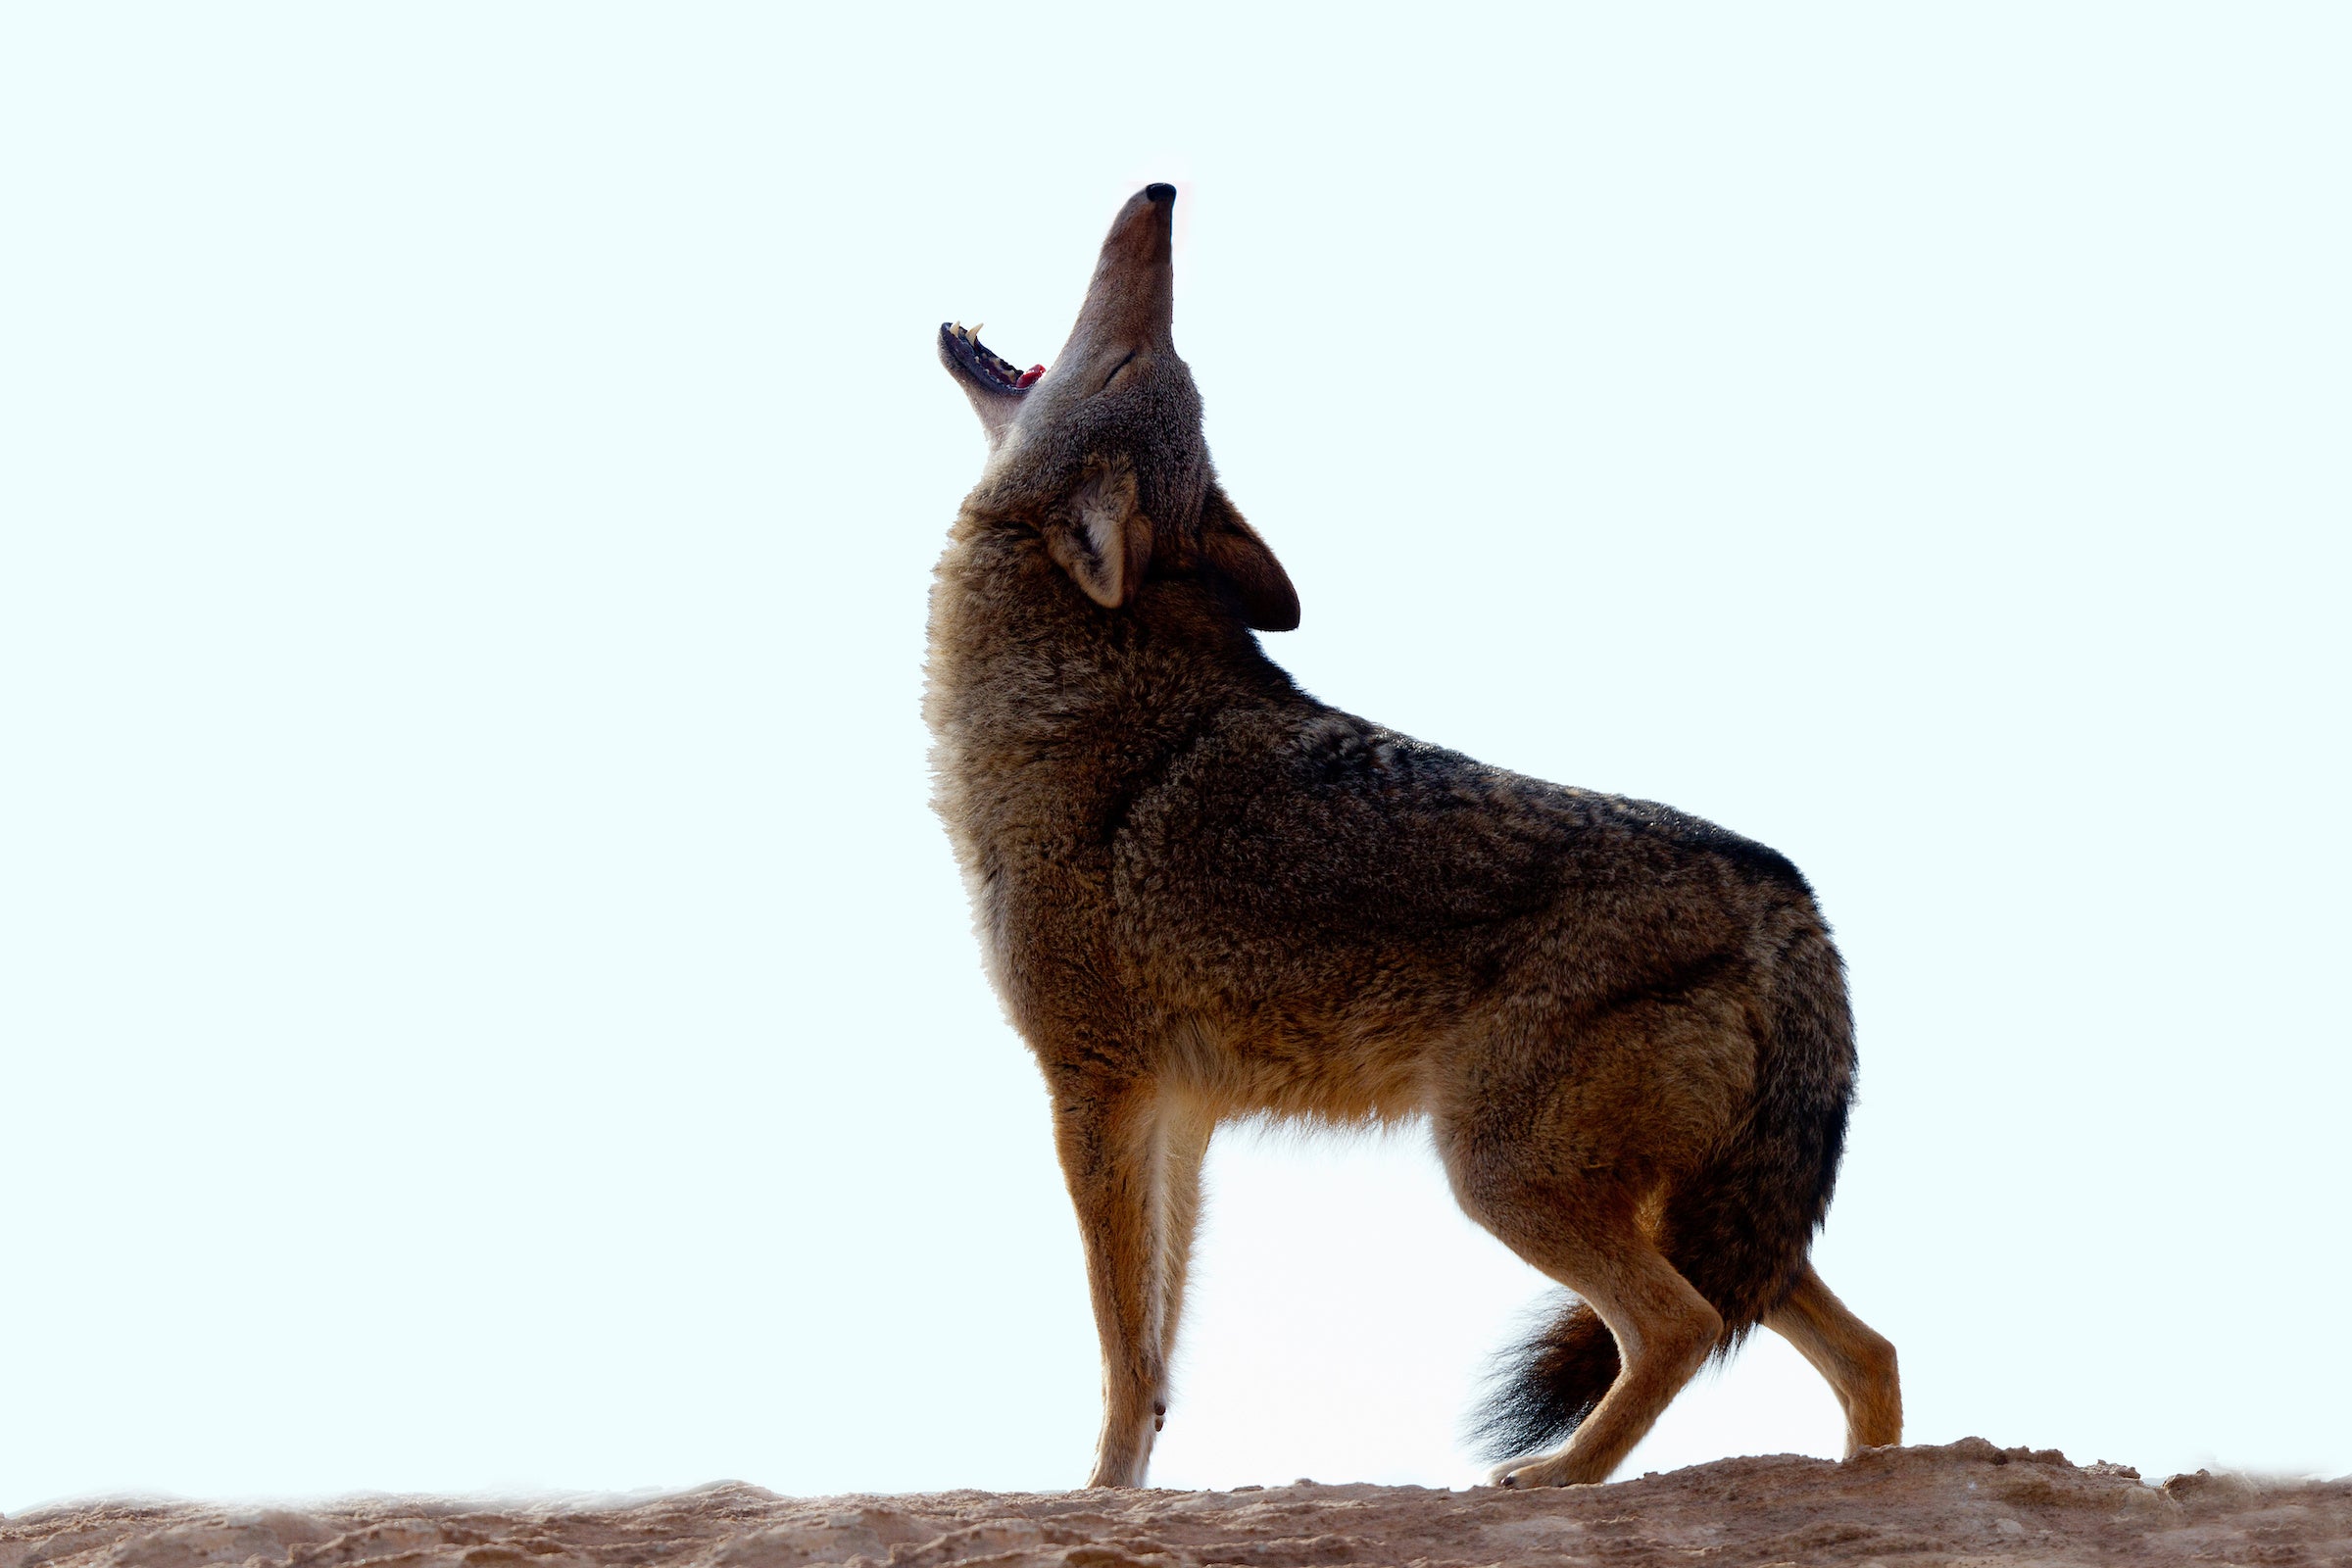 coyote in the desert howling.